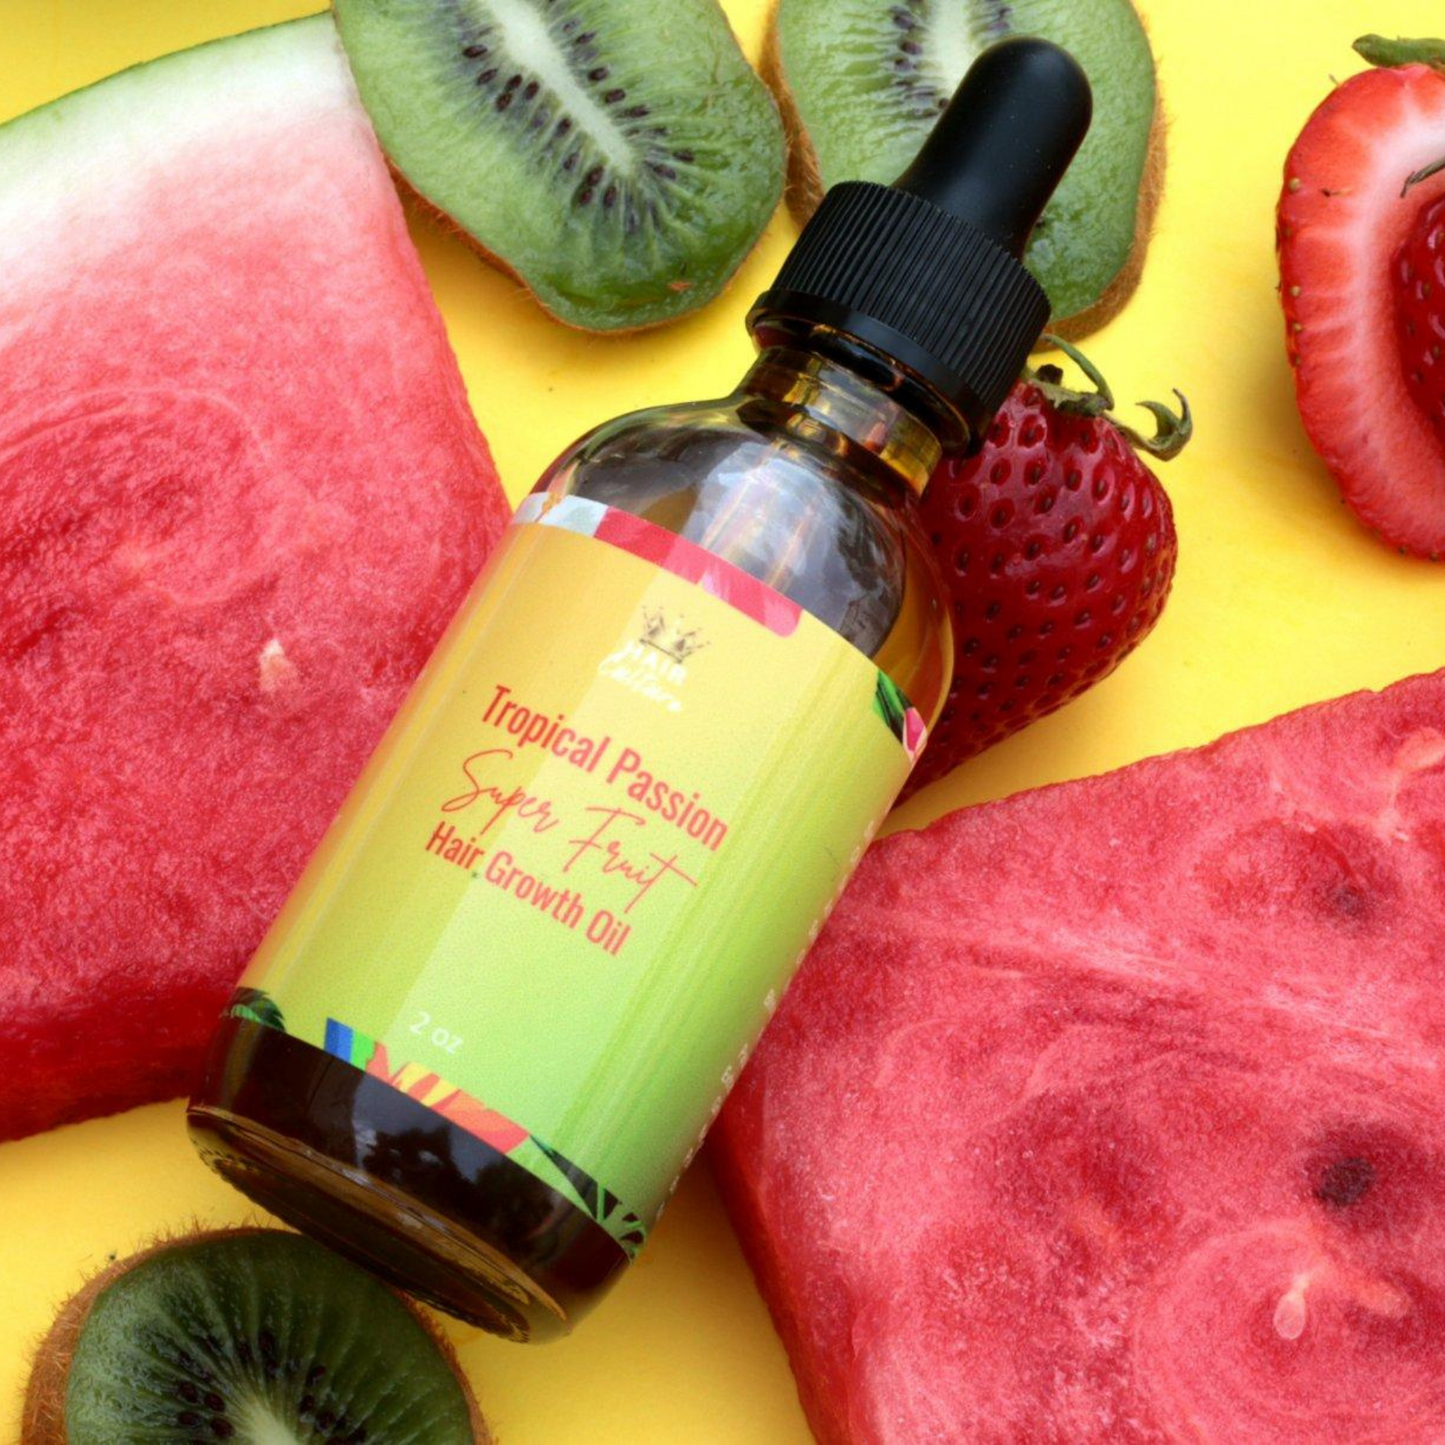 Tropical Passion Superfruit Hair Growth Oil